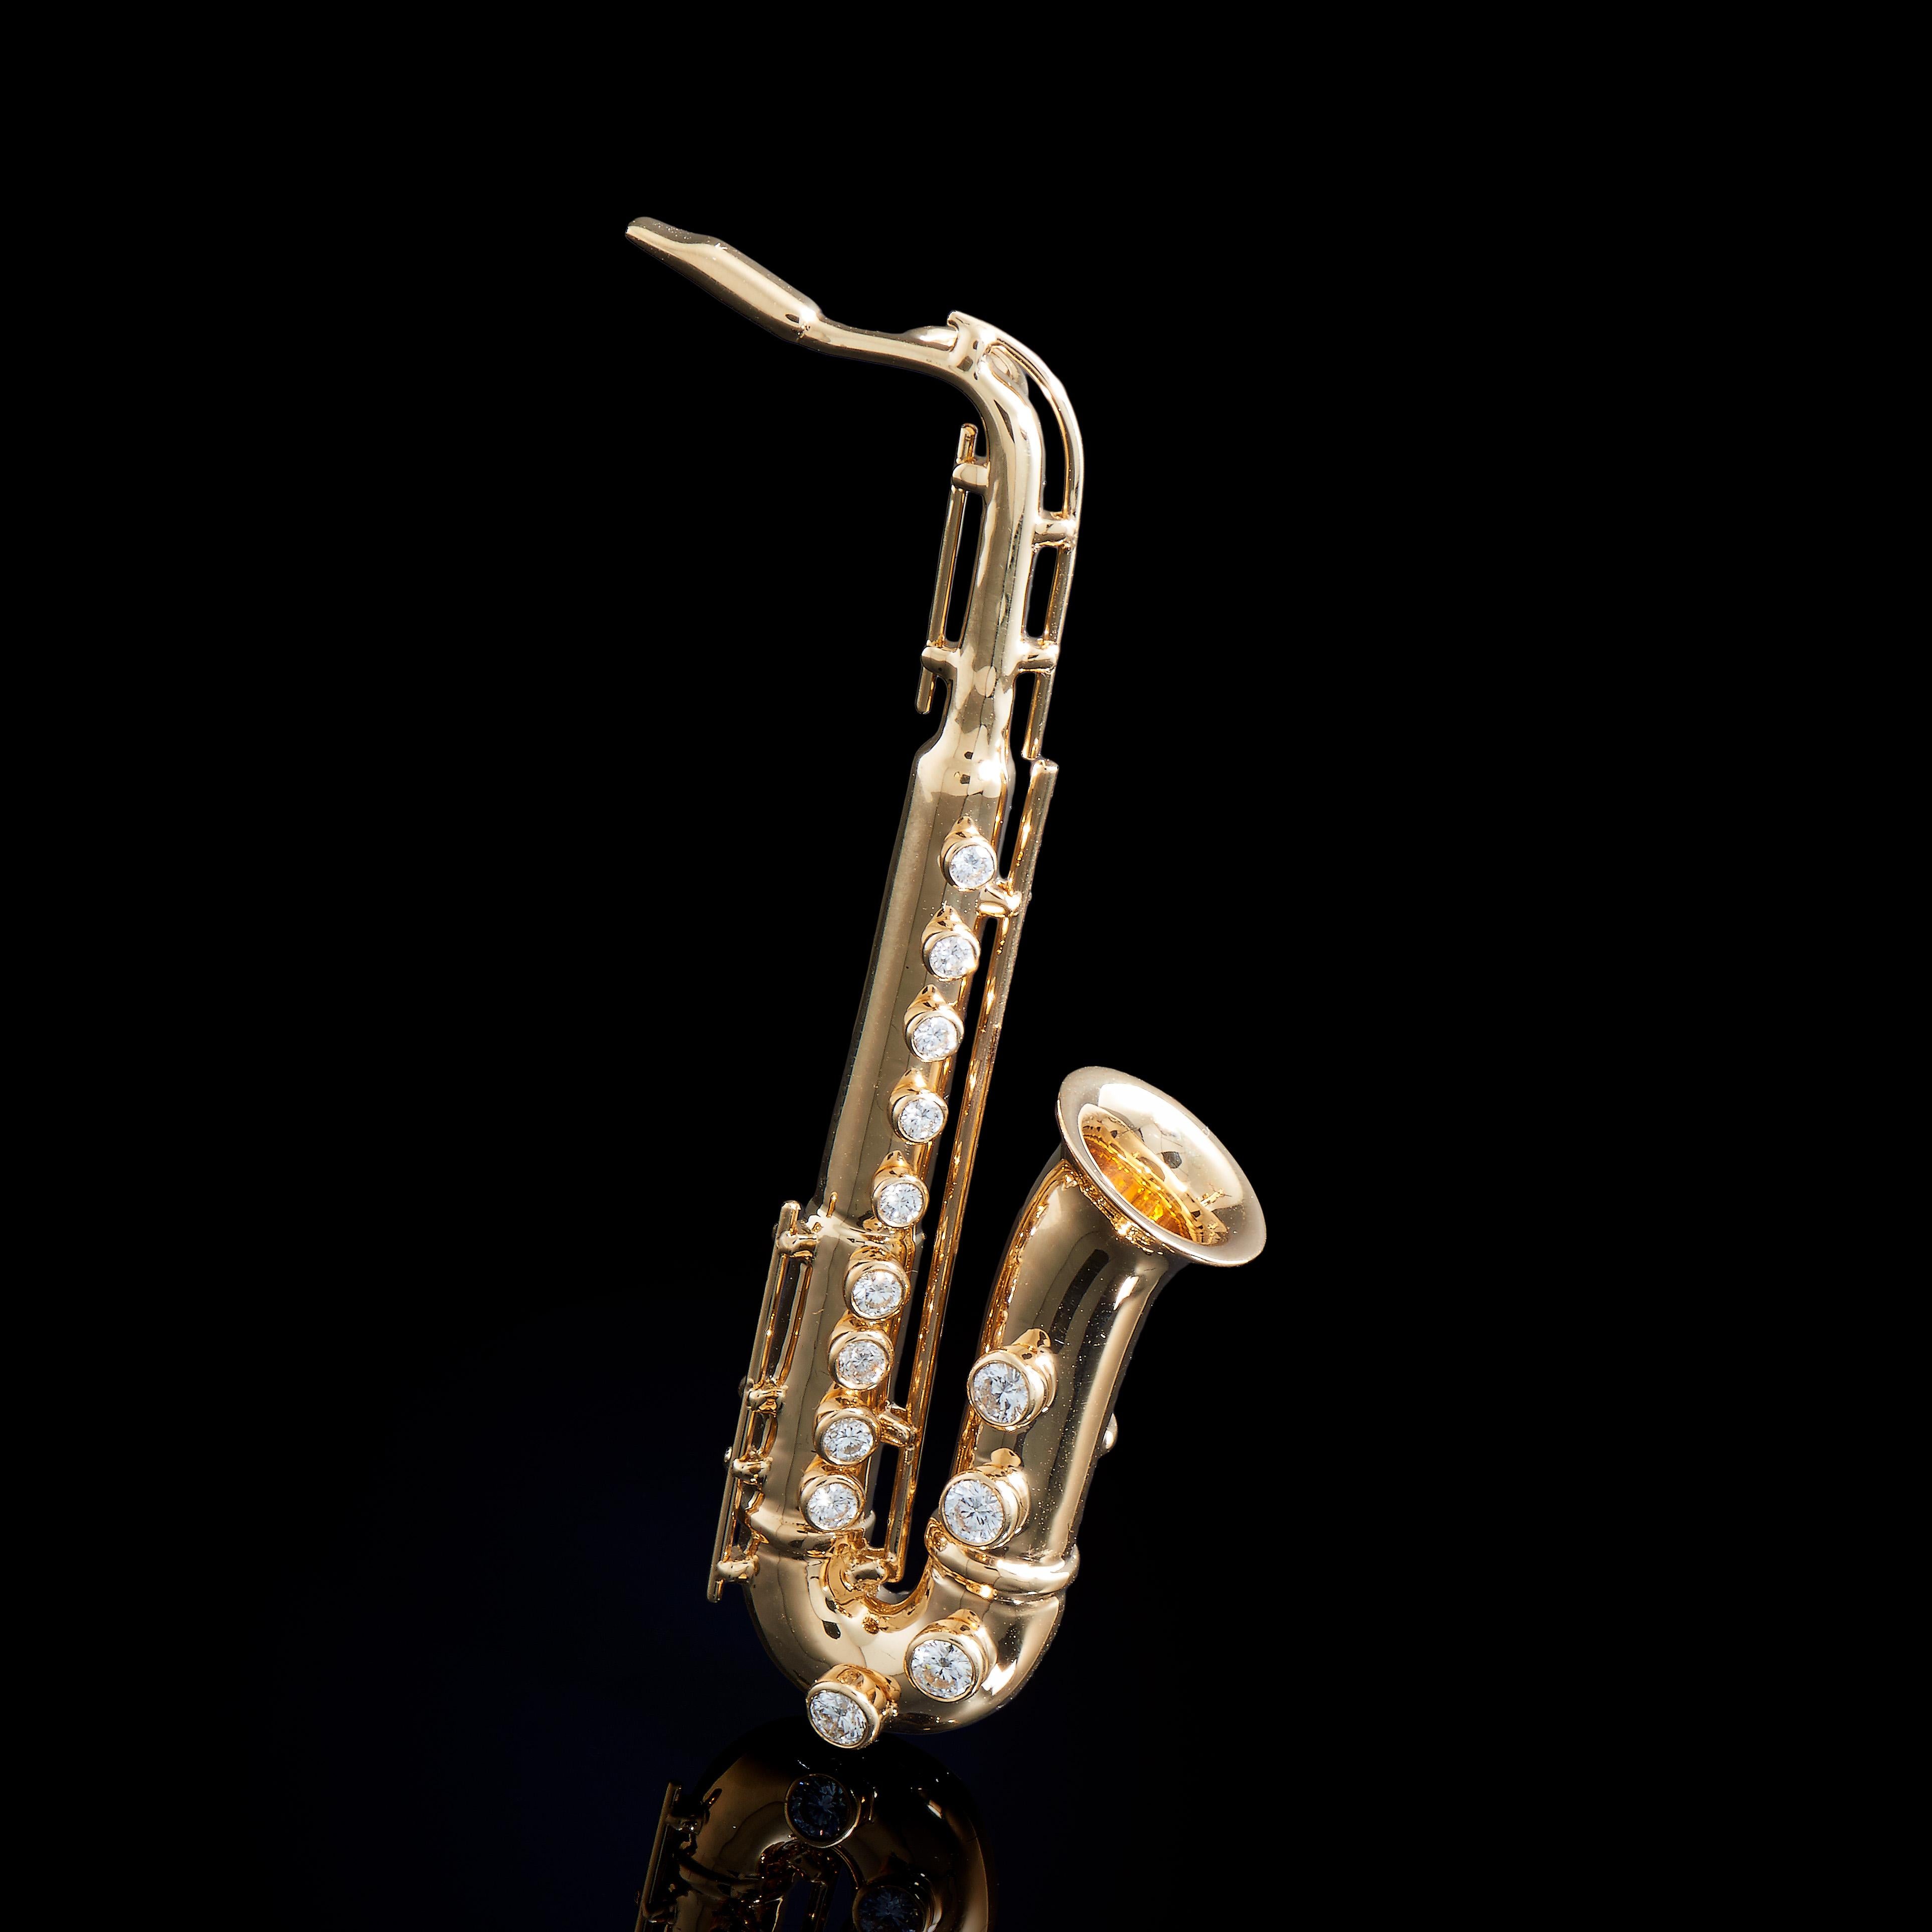 Saxophone  

13 Diamonds (0.61ct), 18K Yellow Gold.
Length: 60mm

This tiny musical instrument is constructed of diamonds and gold. Shapes of all musical instruments are always elegant, stream lined and beautiful, including this miniature one. 
